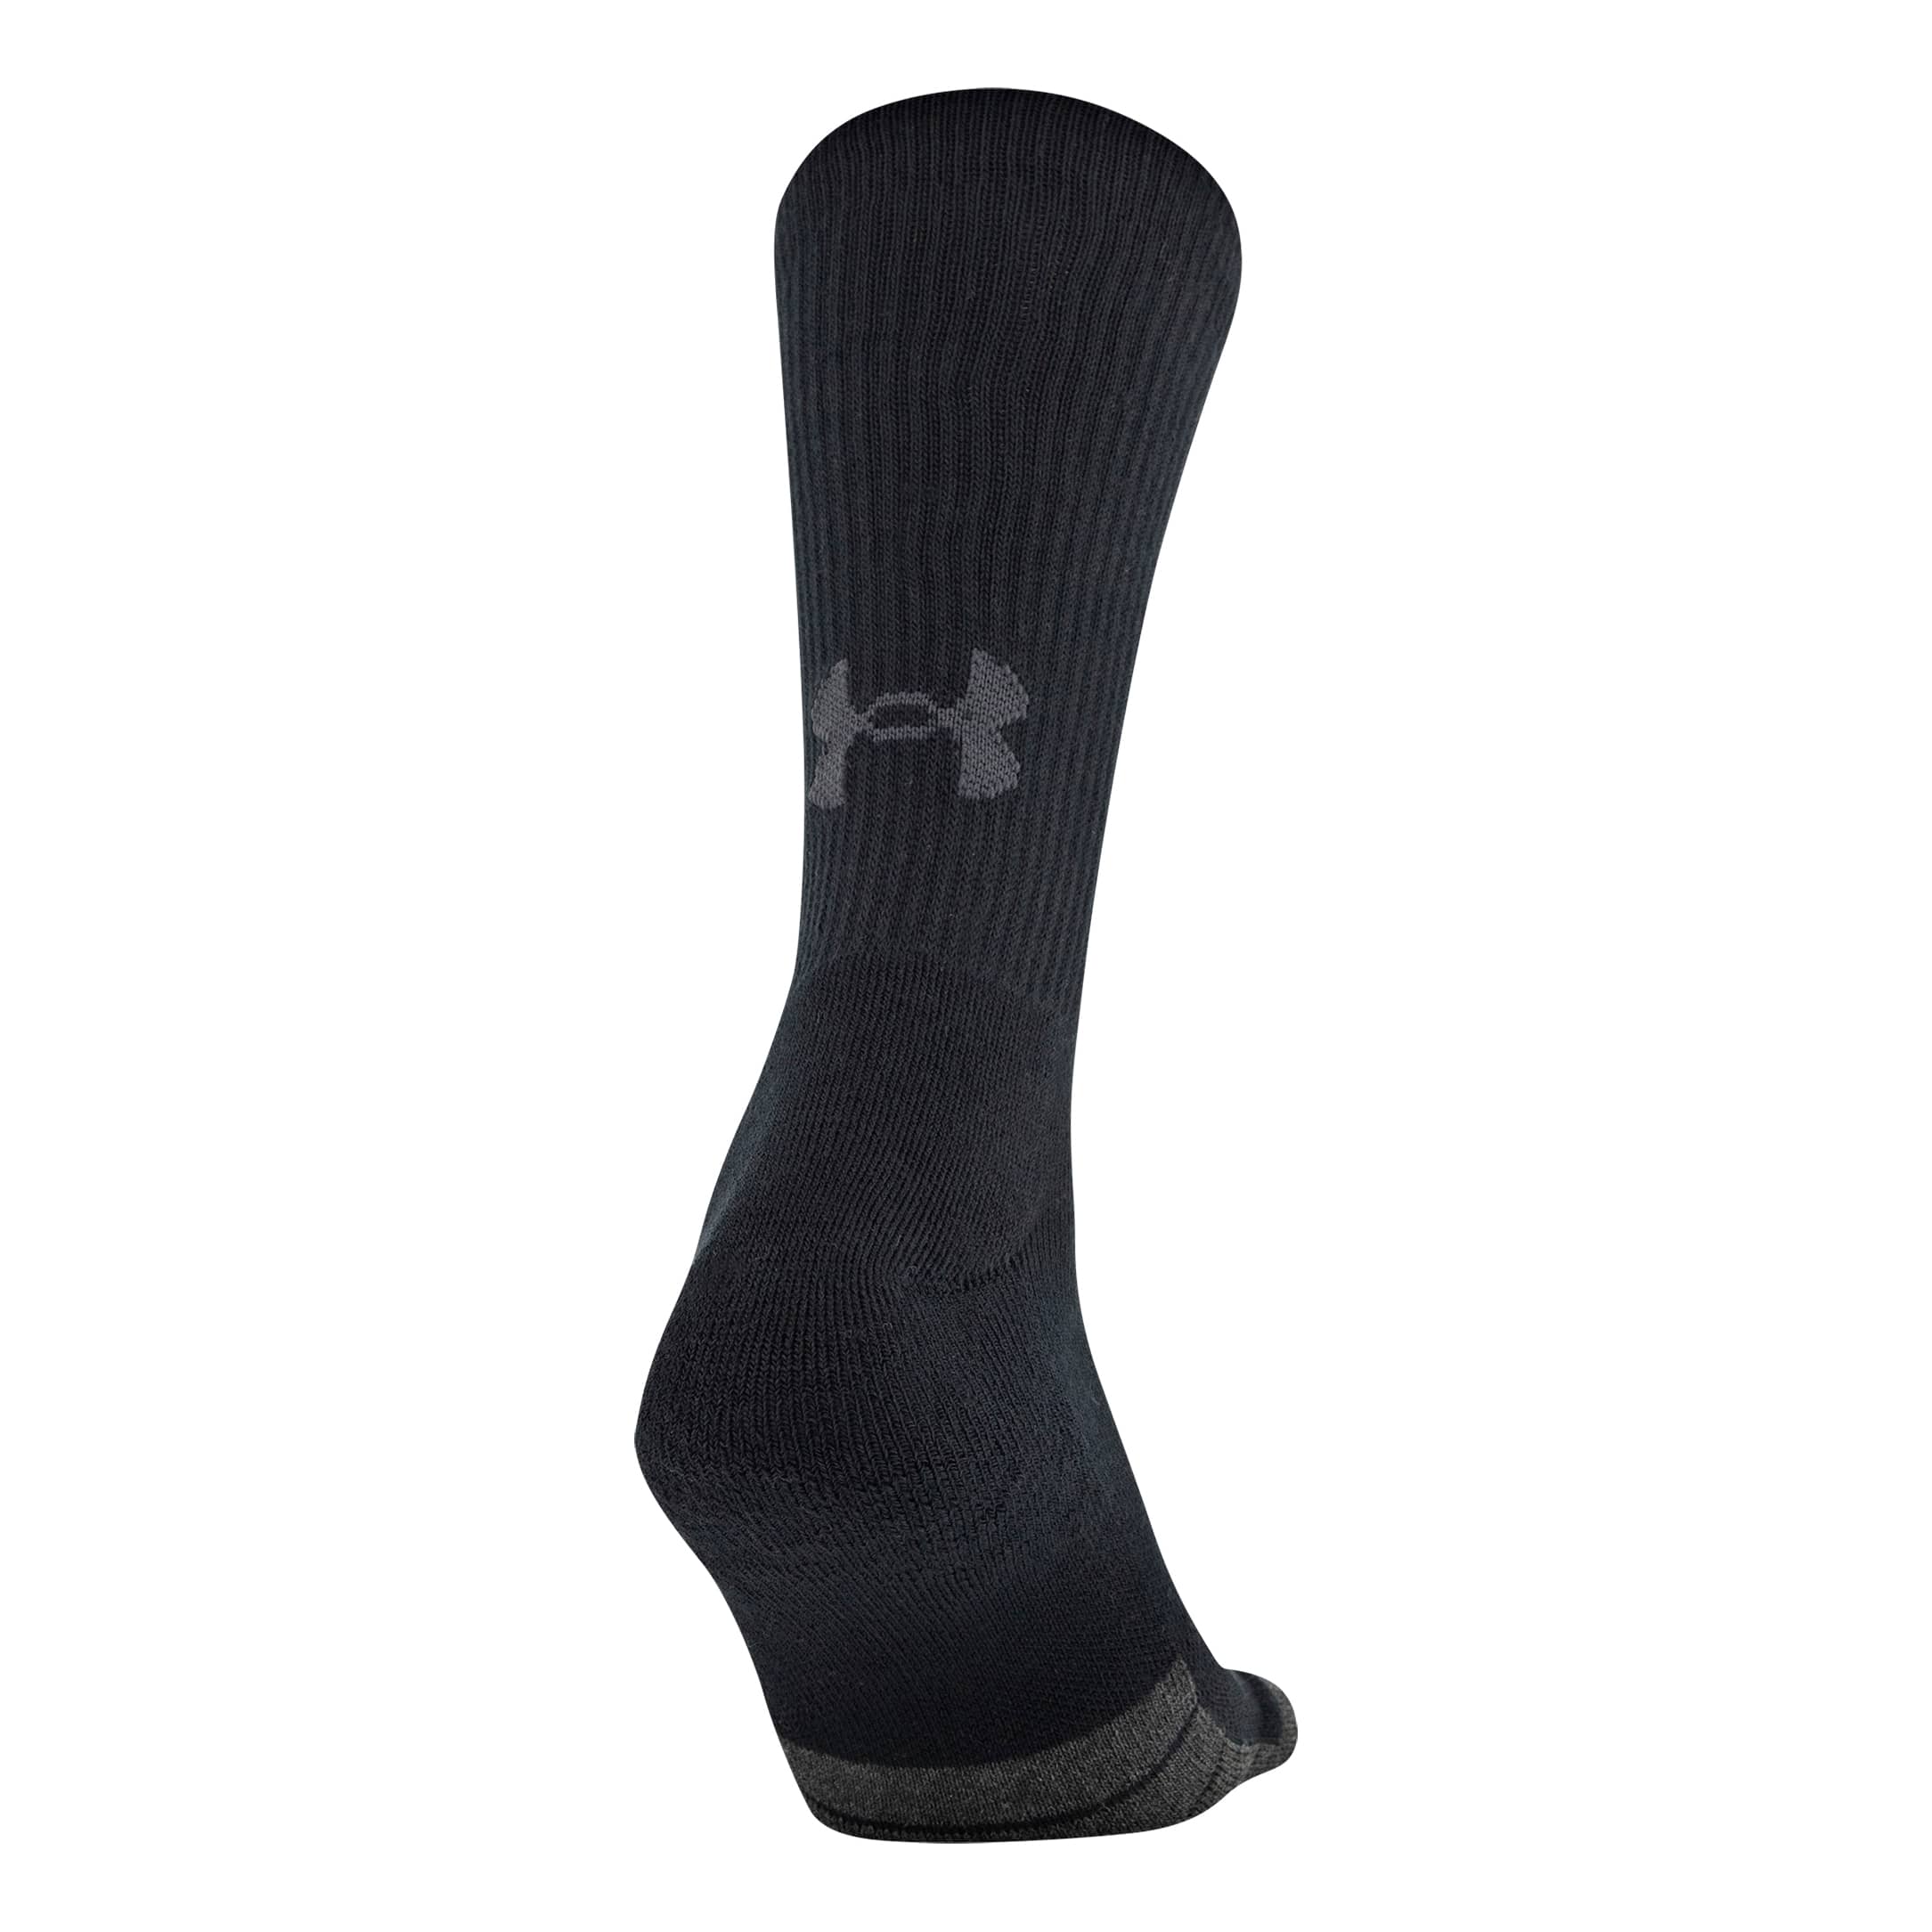 Men's Under Armour 3-pack Elevated Performance Crew Socks